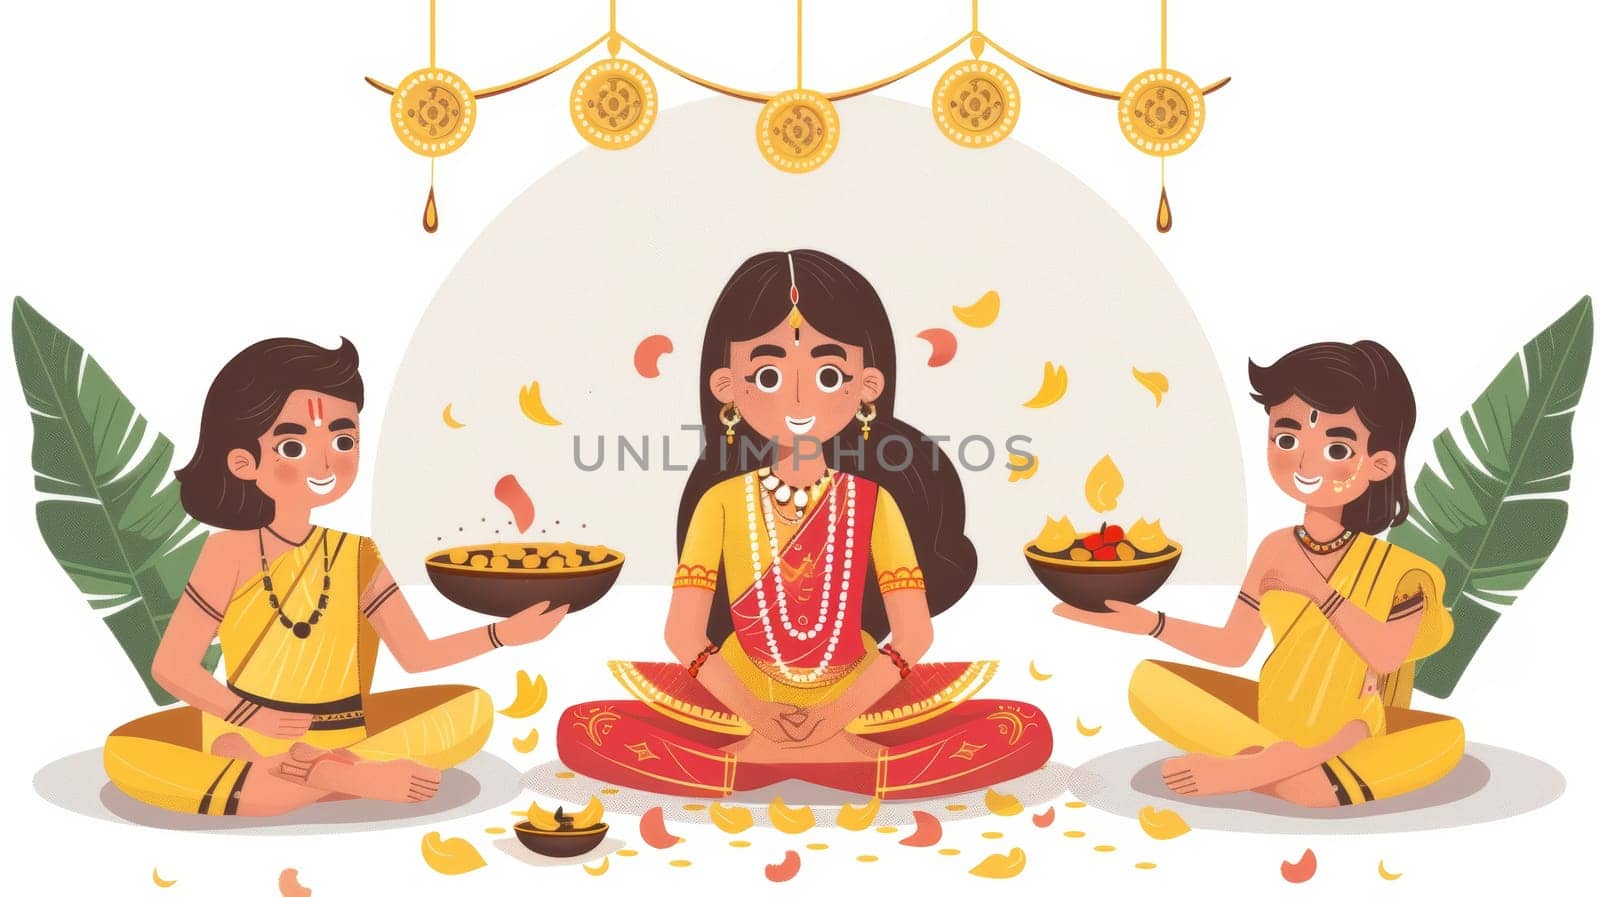 A delightful depiction of a traditional Indian ritual with children offering prayers, featuring golden hanging decorations and a backdrop of banana leaves